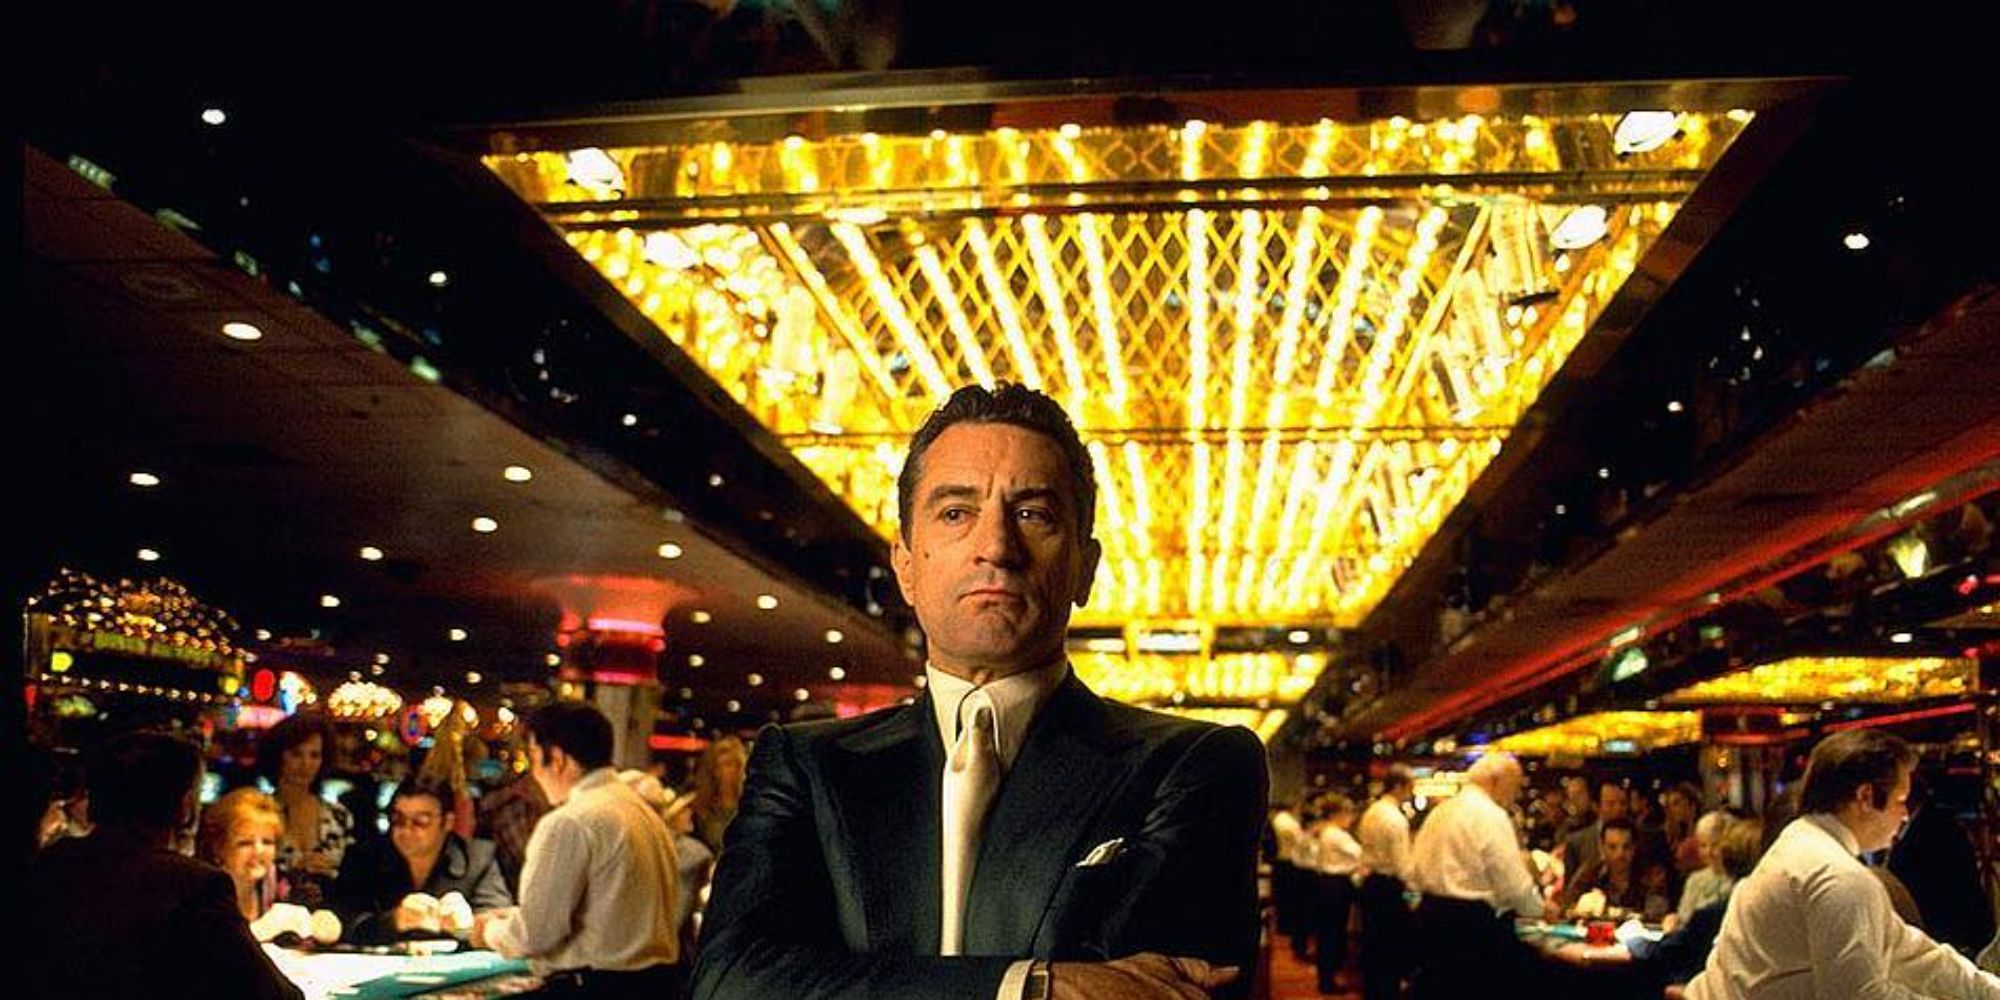 Ace Rothstein surveying his casino in Vegas